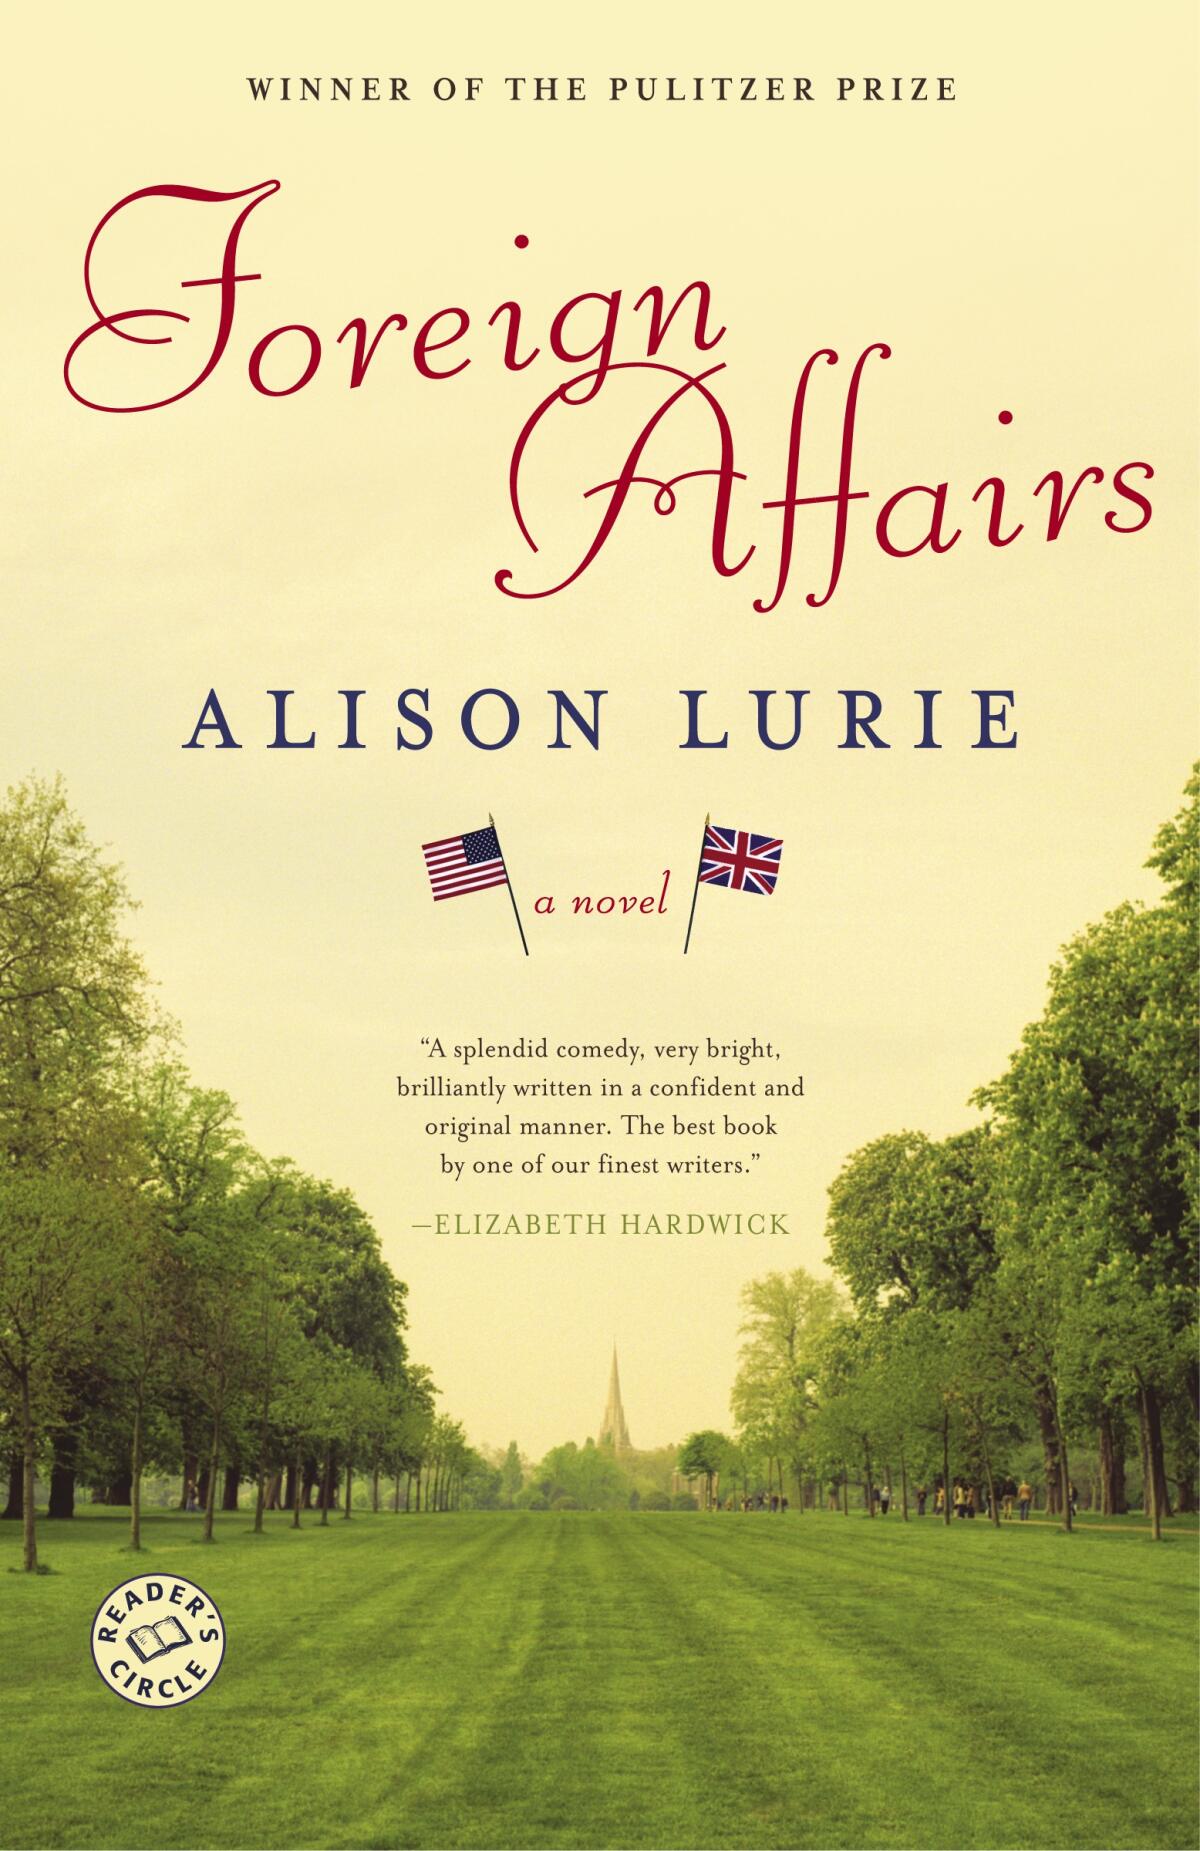 "Foreign Affairs" by Alison Lurie.